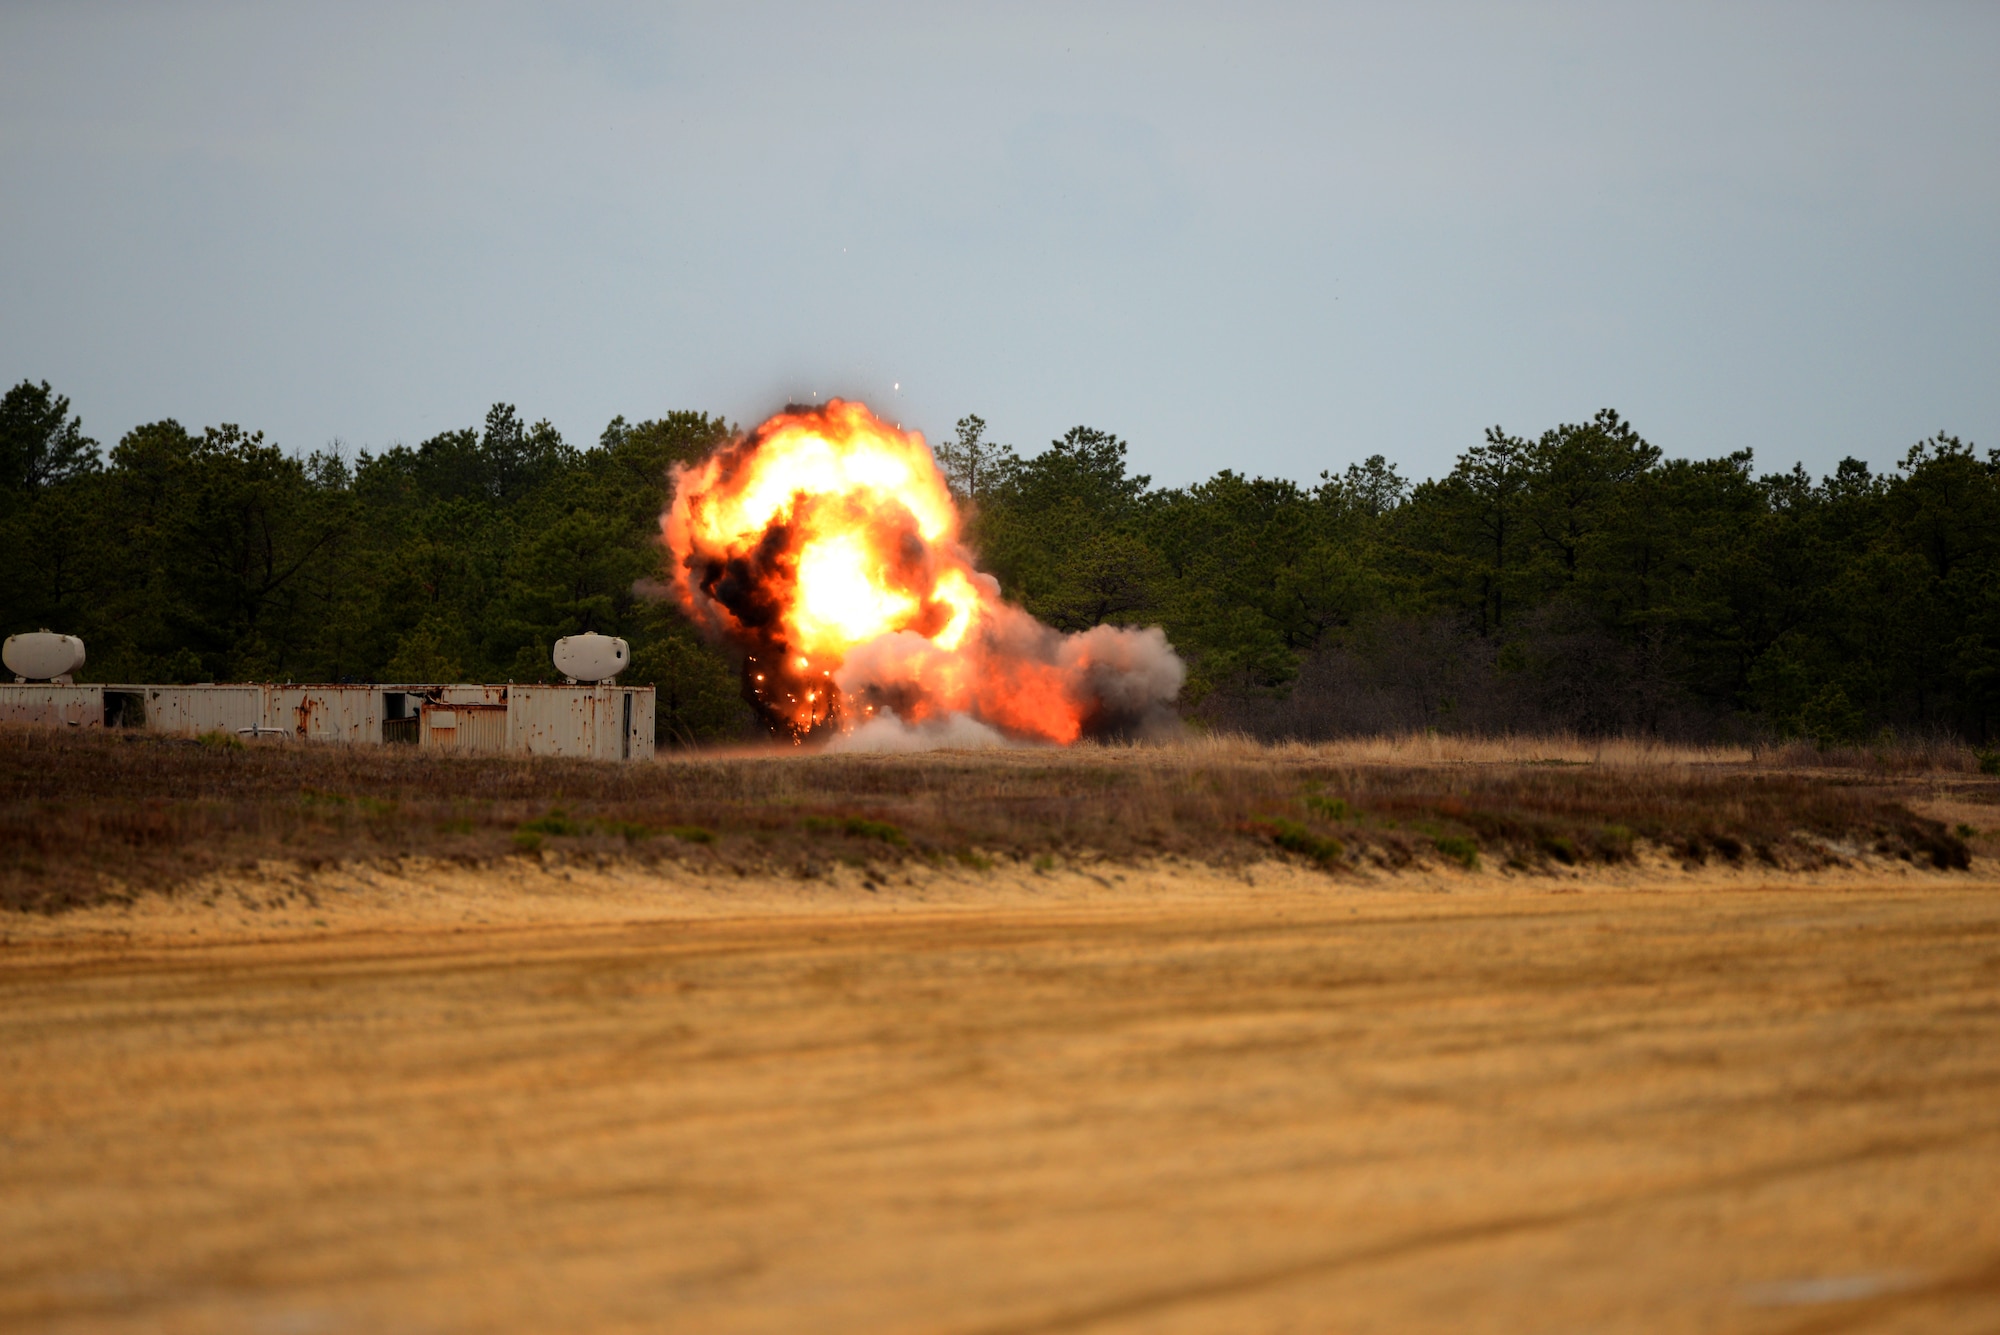 A picture of C-4 explosives detonating on used BDU-50 500 lb. concrete-filled practice bombs.